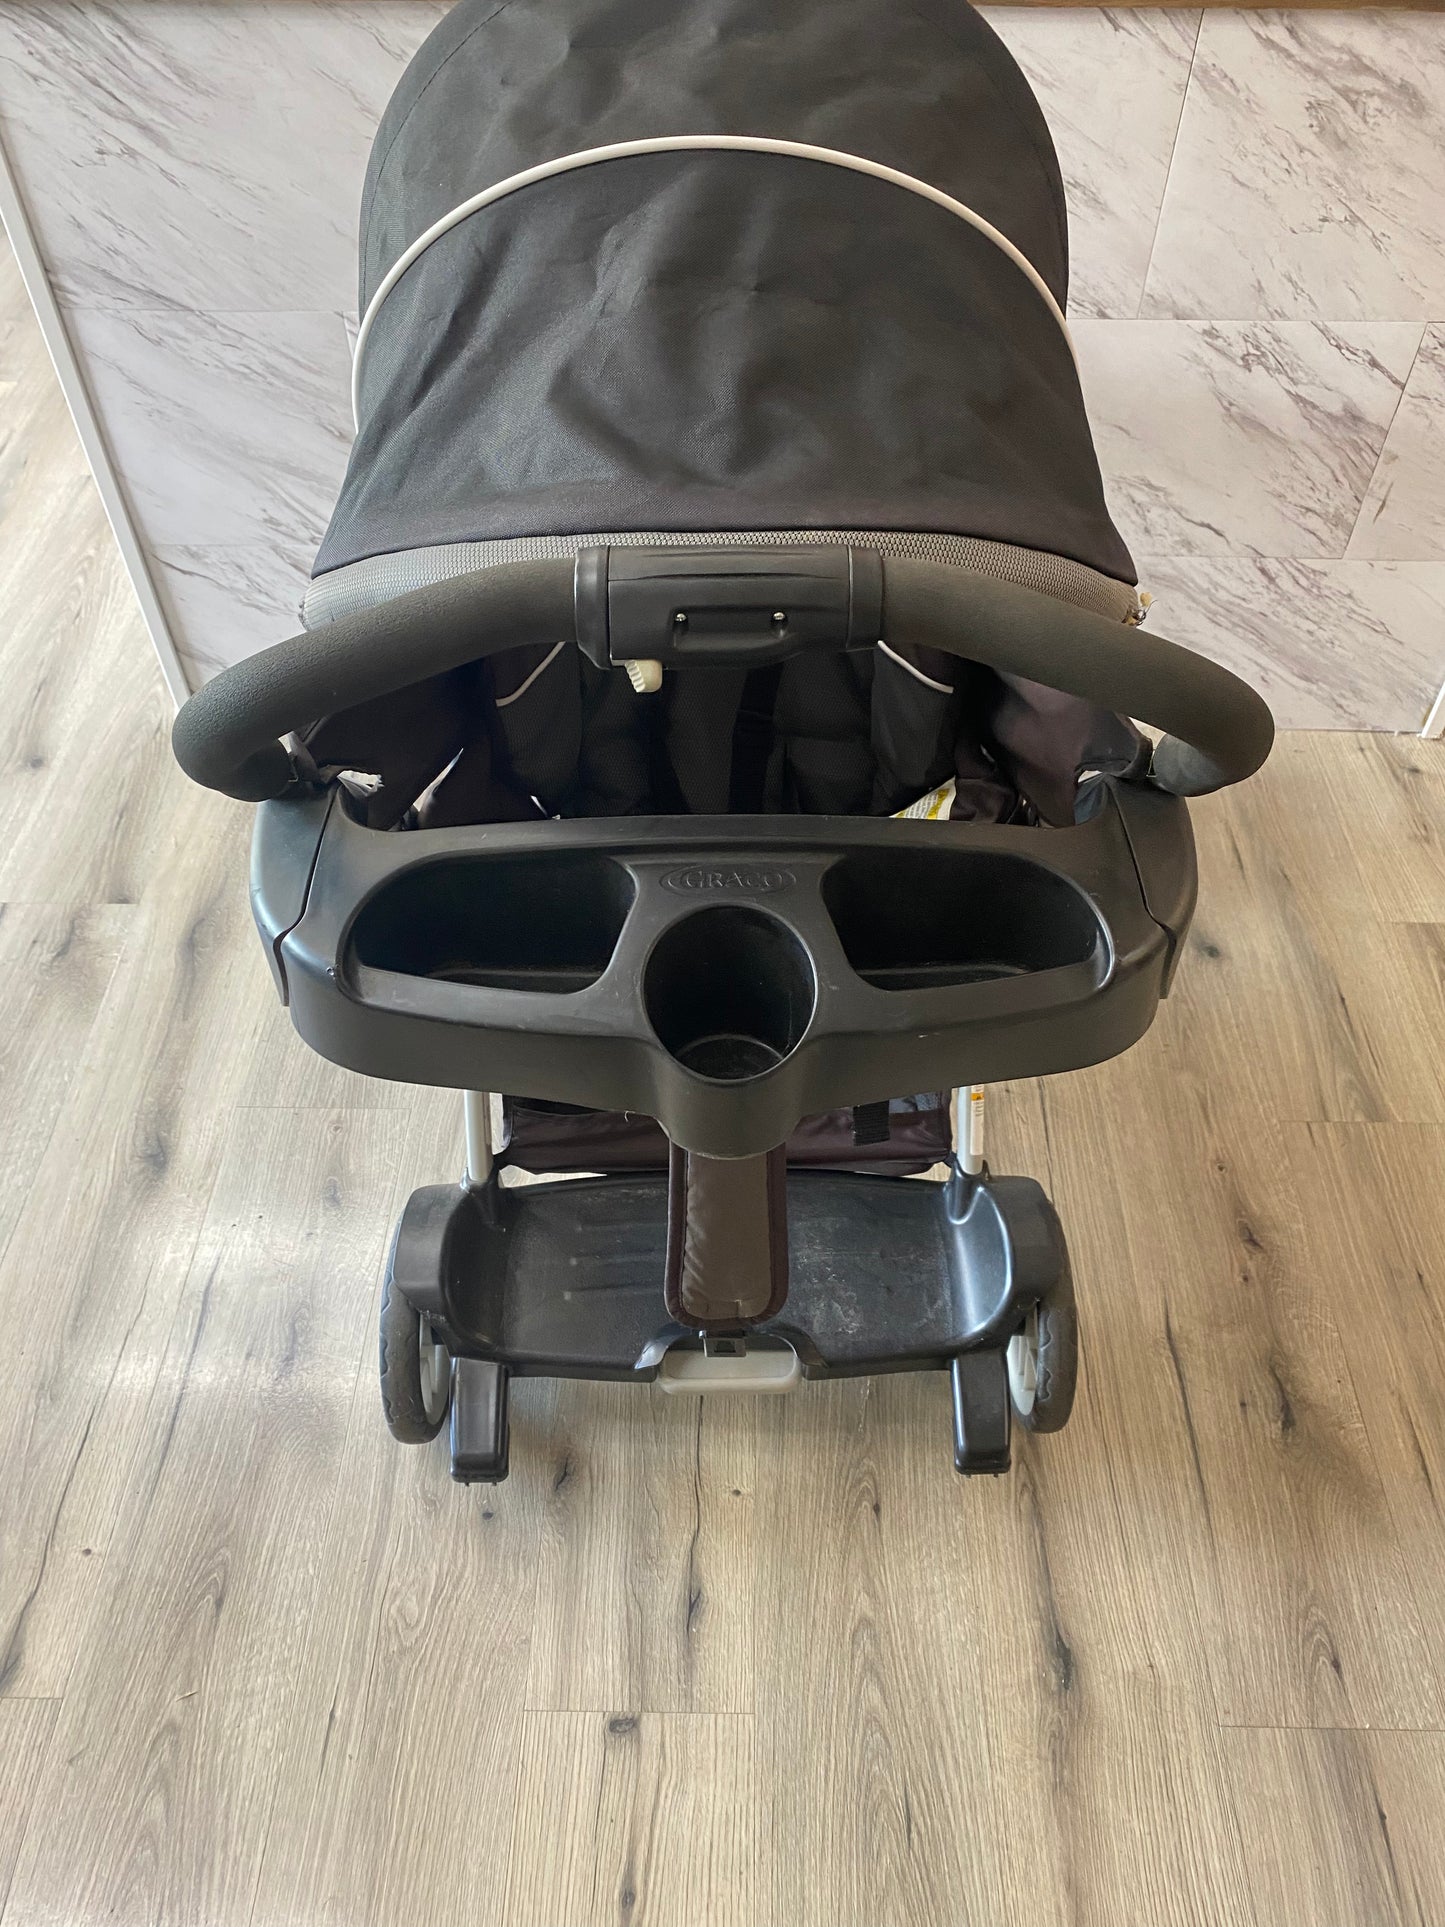 Graco DuoGlider Click Connect Double Stroller